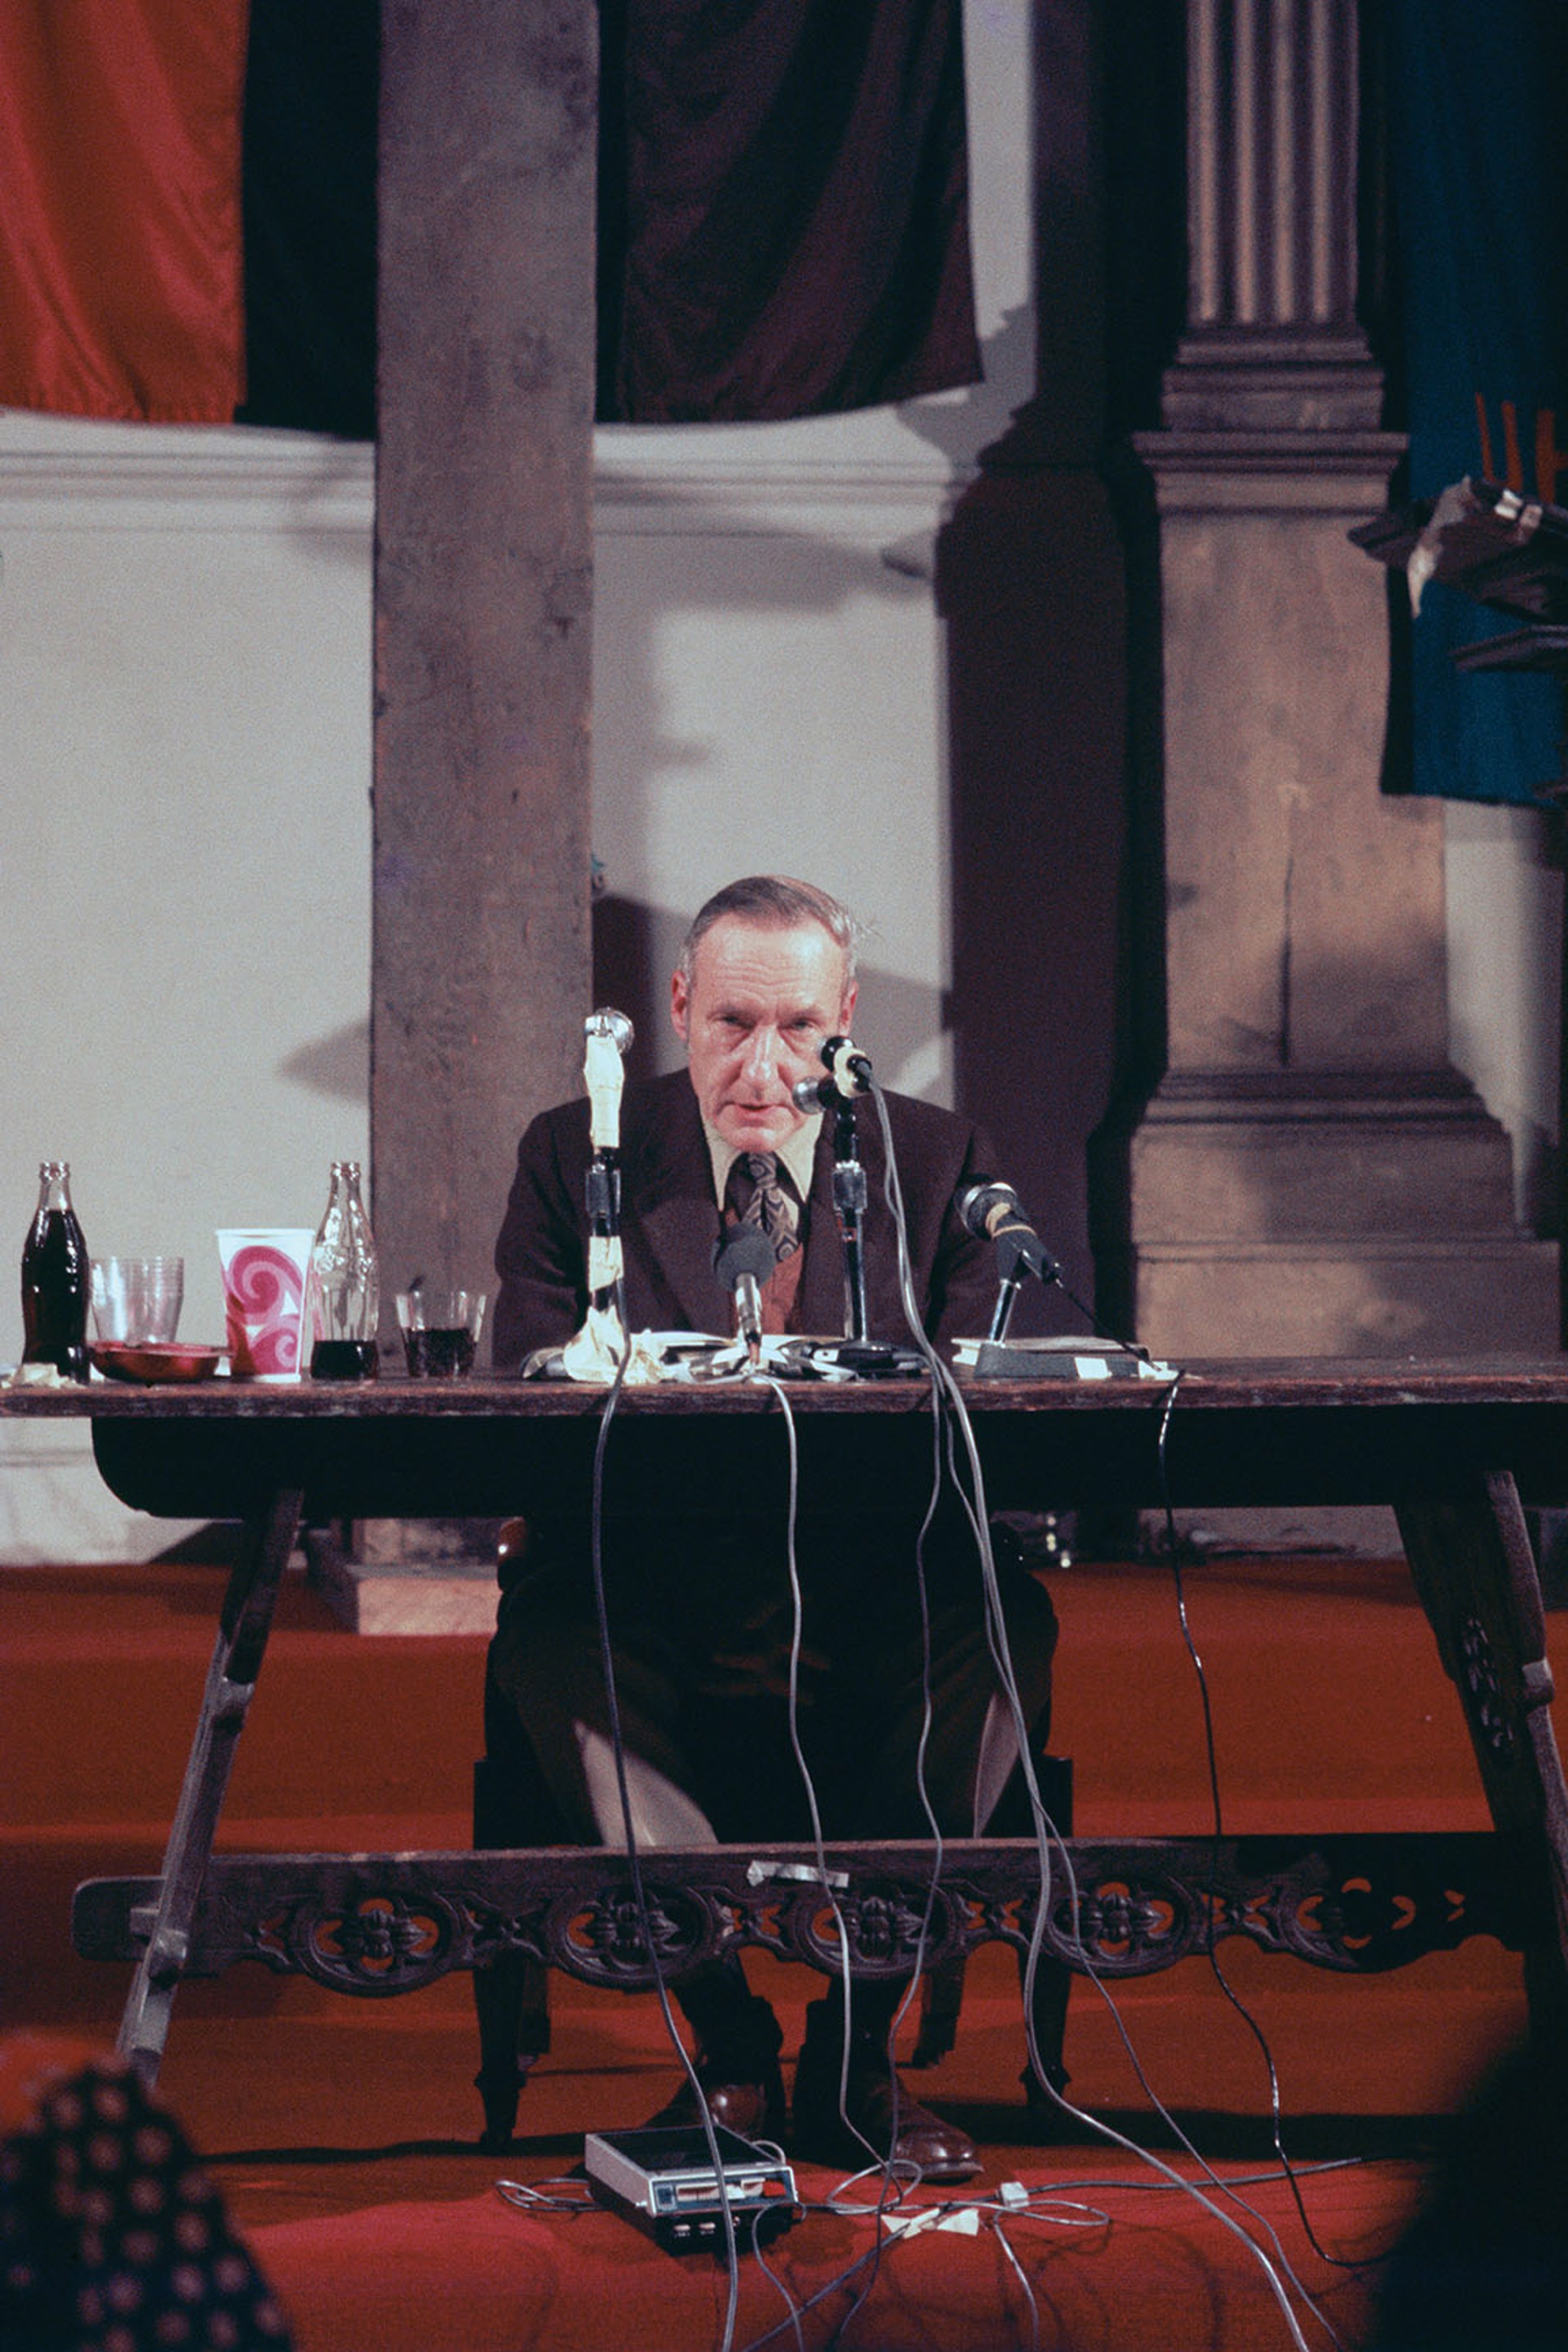 William Burroughs, St. Mark's Church in-the-Bowery, 1974 by Stephen Aiken